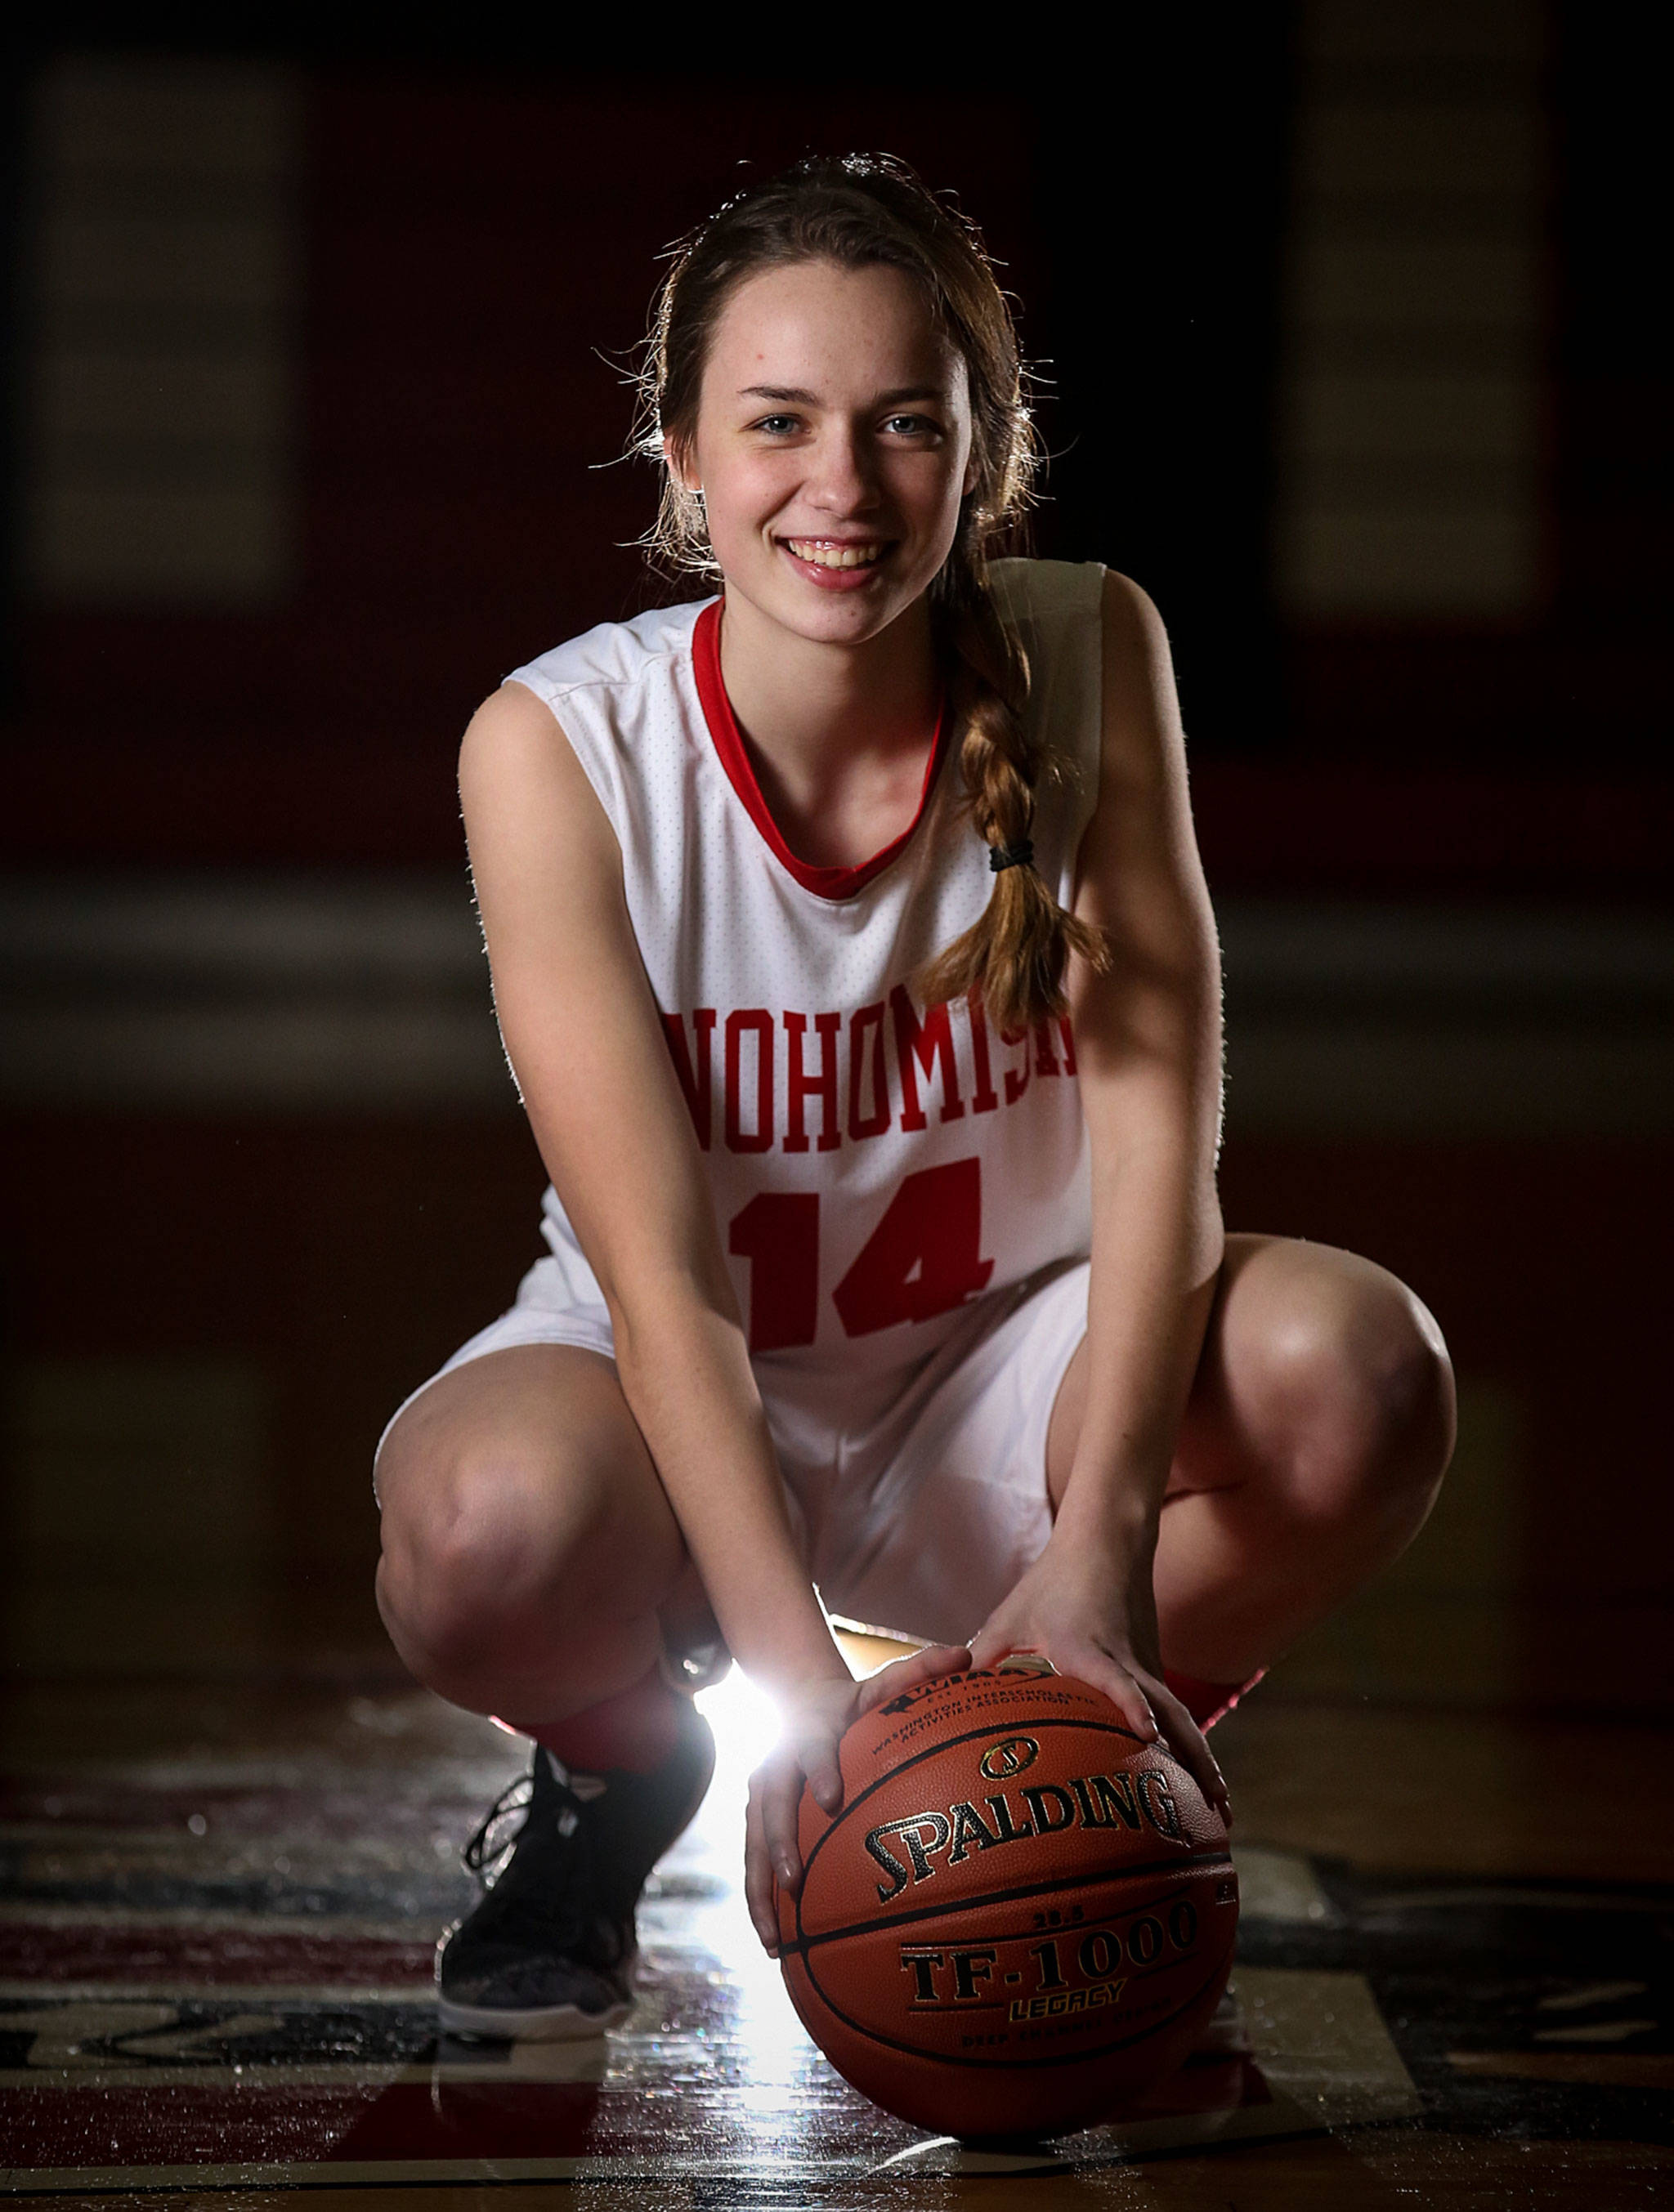 Snohomish senior point guard Maya DuChesne averaged 14.1 points, 4.7 rebounds, 3.2 assists and 2.4 steals per game this season while leading the Panthers to a fourth-place state trophy. (Kevin Clark / The Herald)